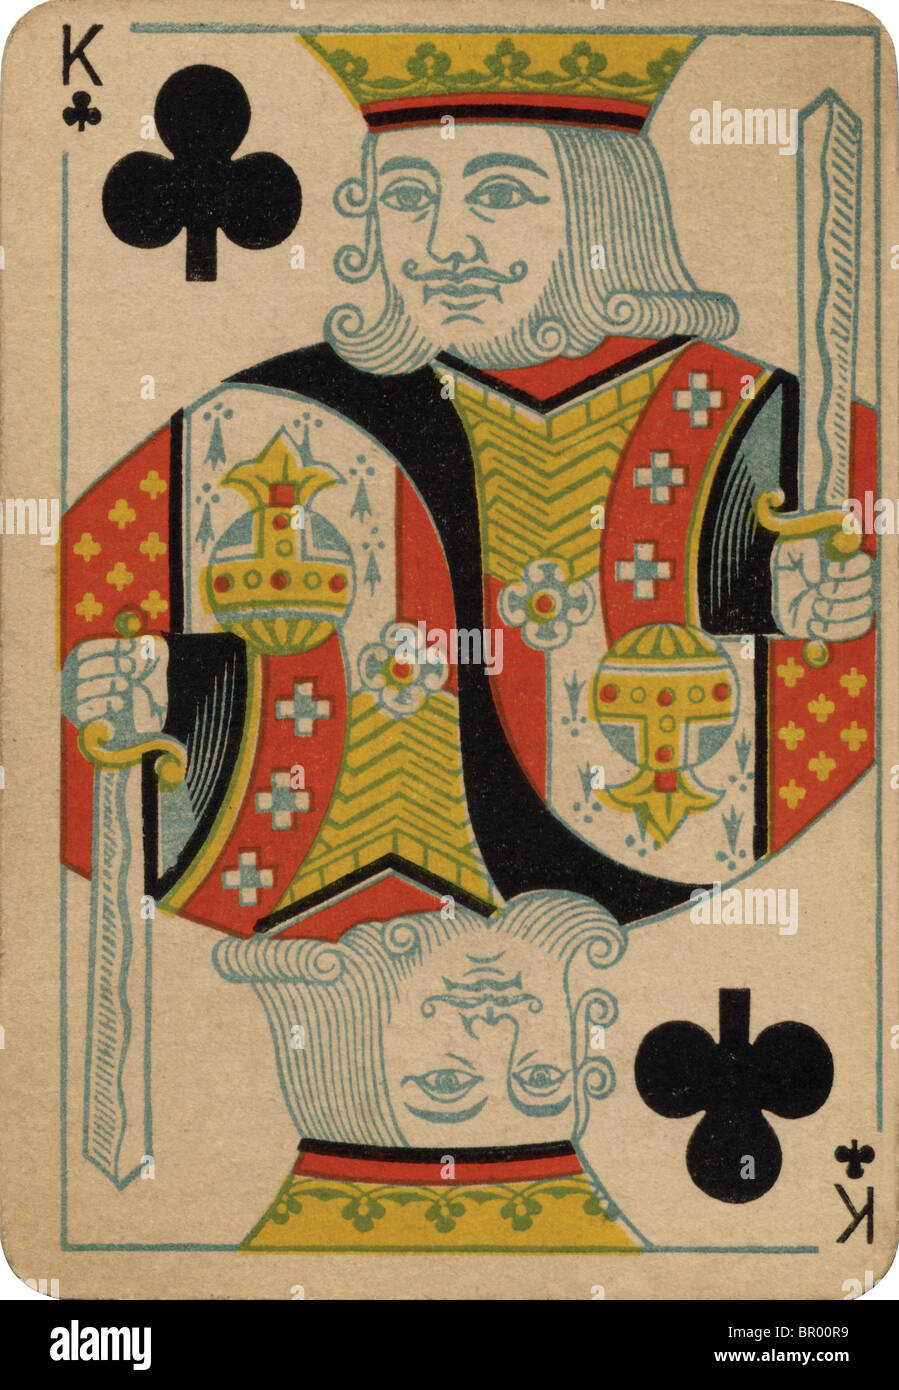 Classic Playing Card Playing Card Hearts King of Hearts Game Room Art Heart King King Card King Rose Heart Crown Classic King